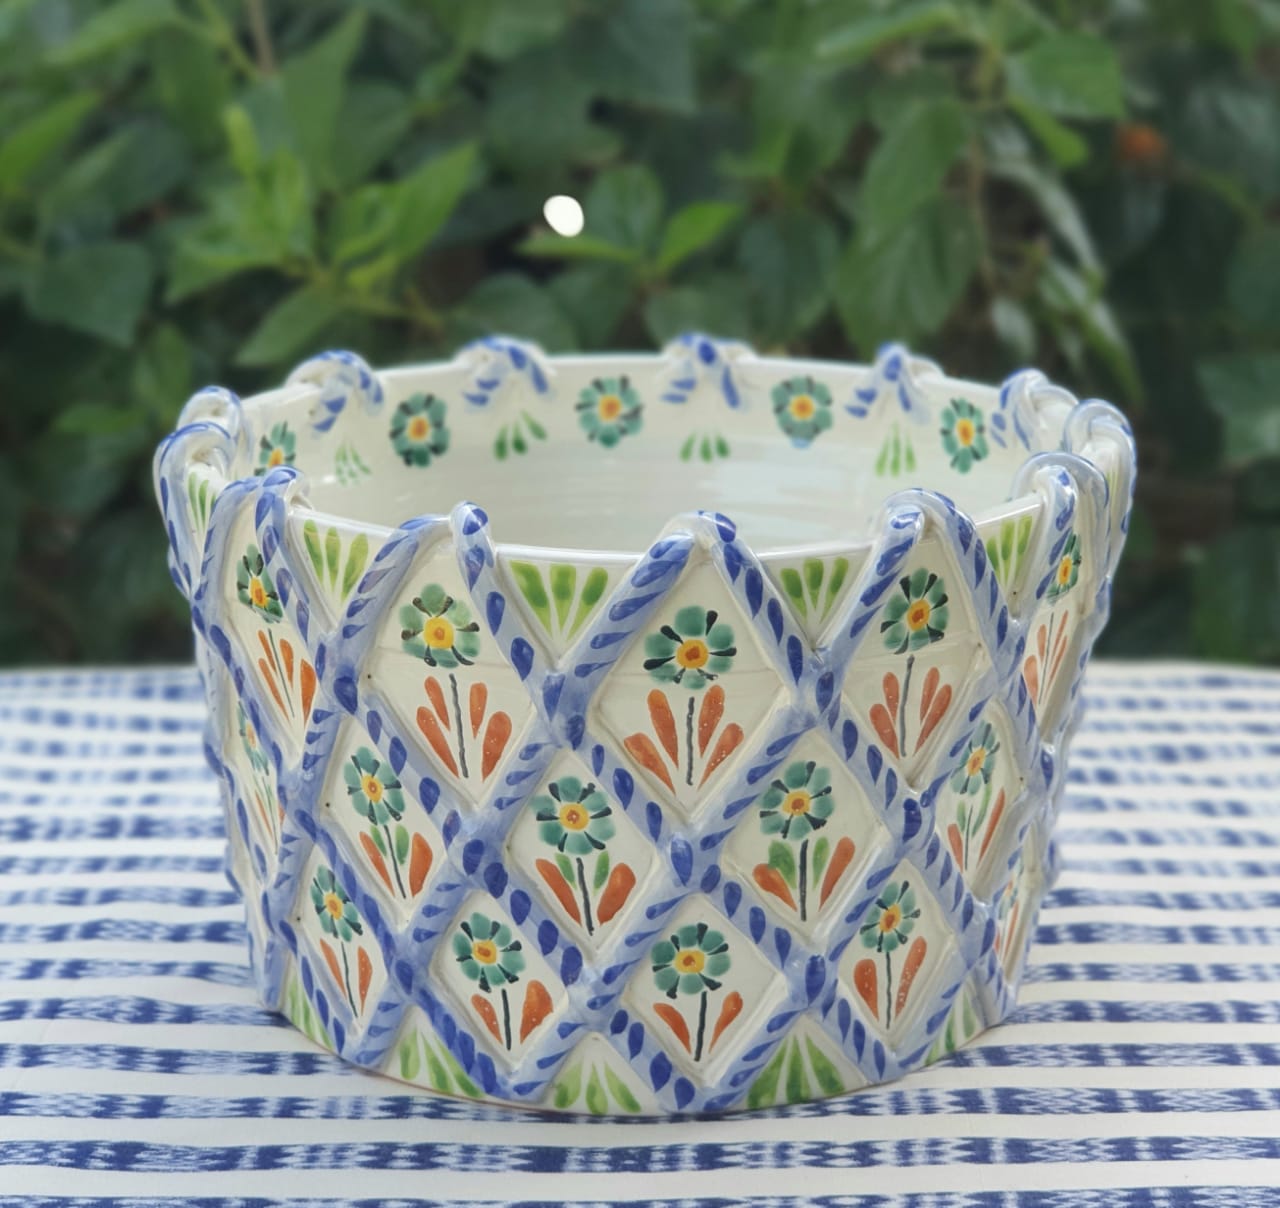 Fruit Canister With Woven Relief MultiColors